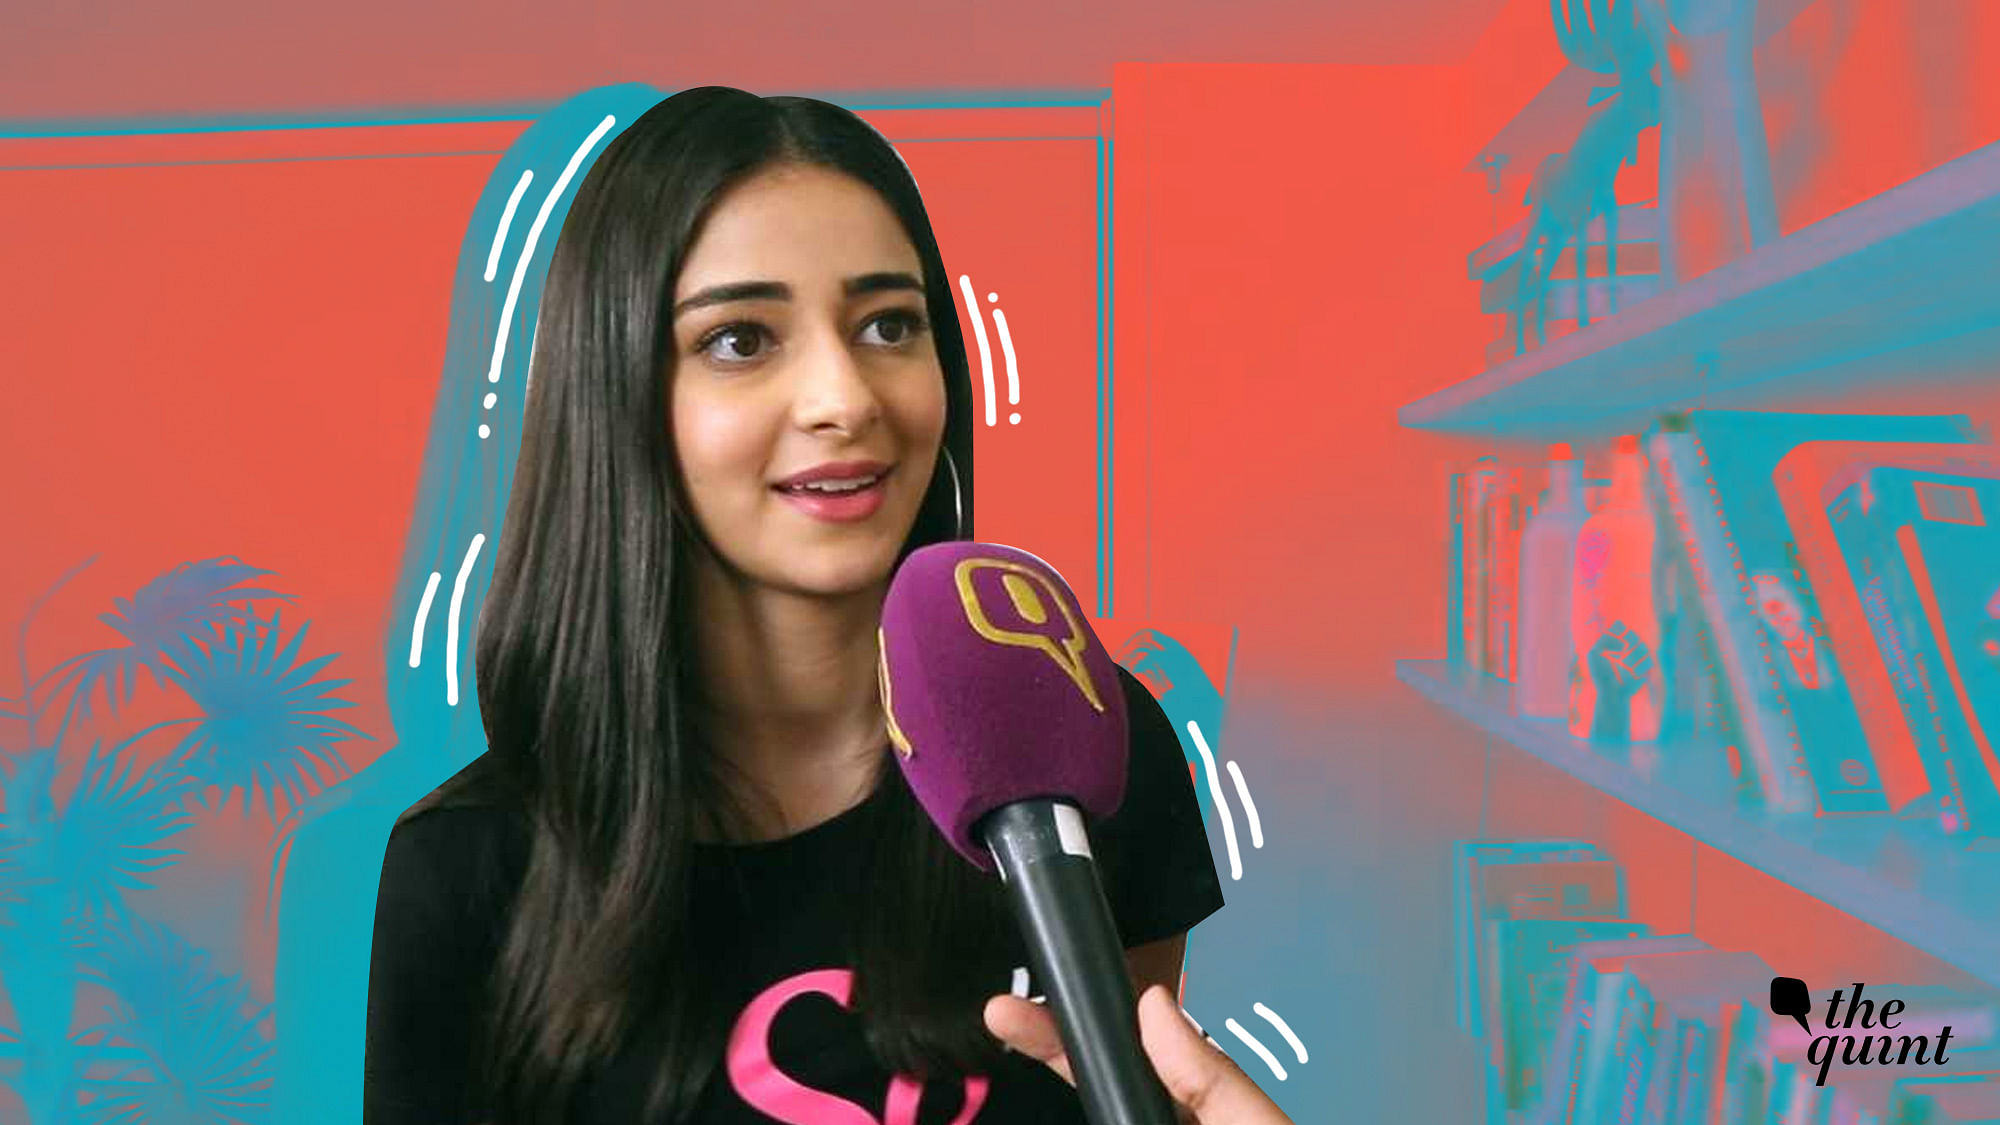 Ananya Panday on her new campaign against cyber bullying ‘So Positive’.